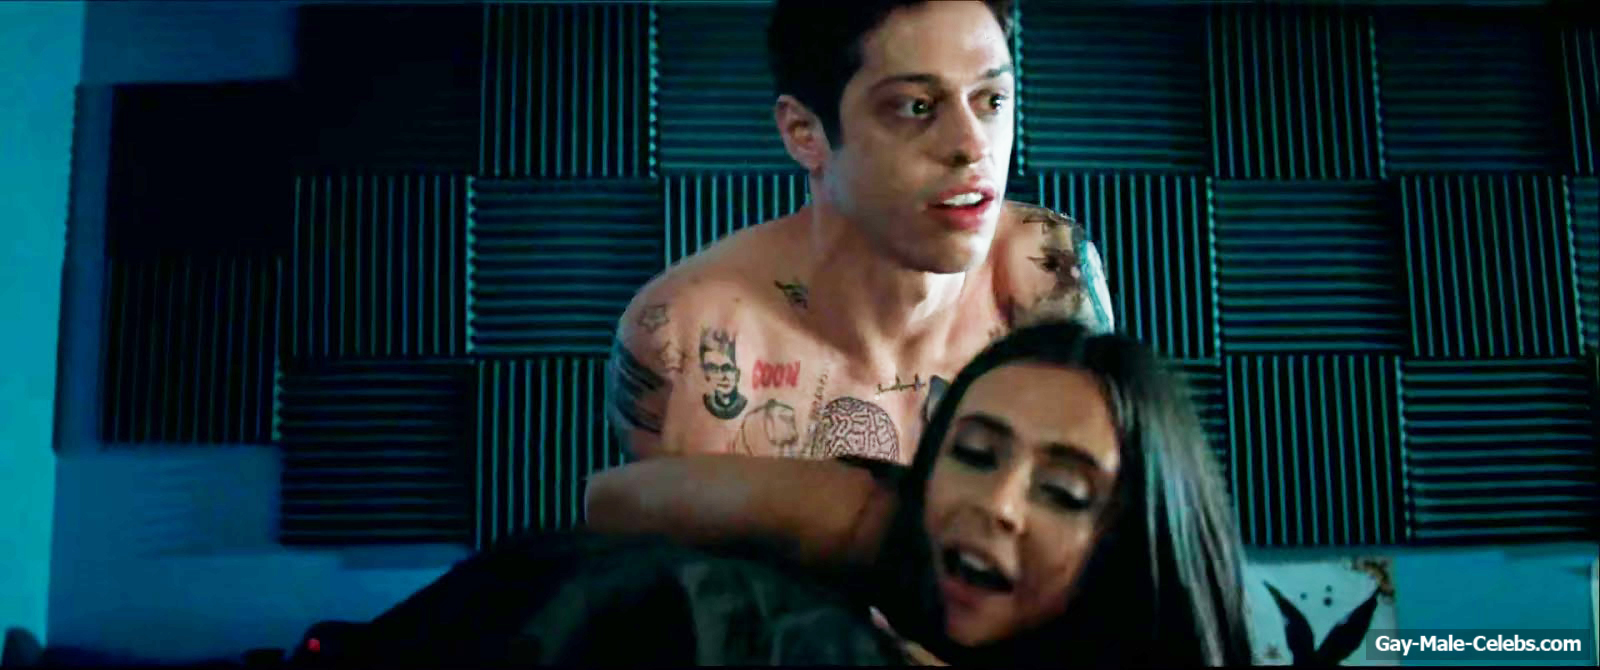 After all, there Pete Davidson demonstrated his nude tattooed body! 